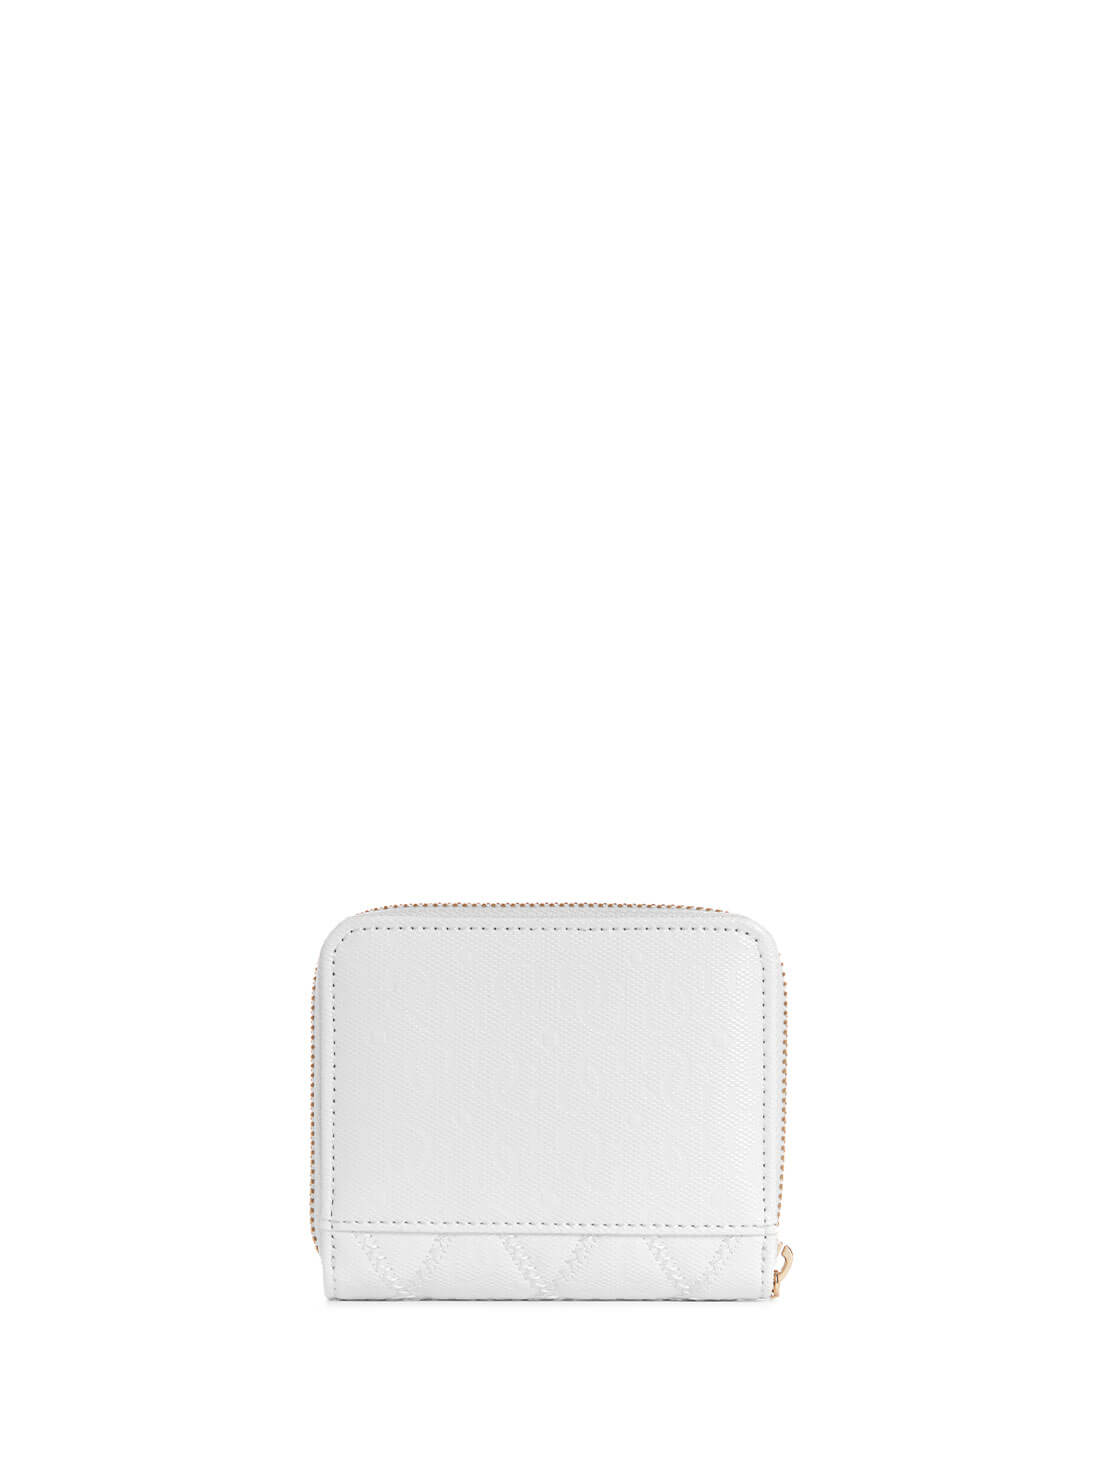 GUESS White Adi Small Wallet back view